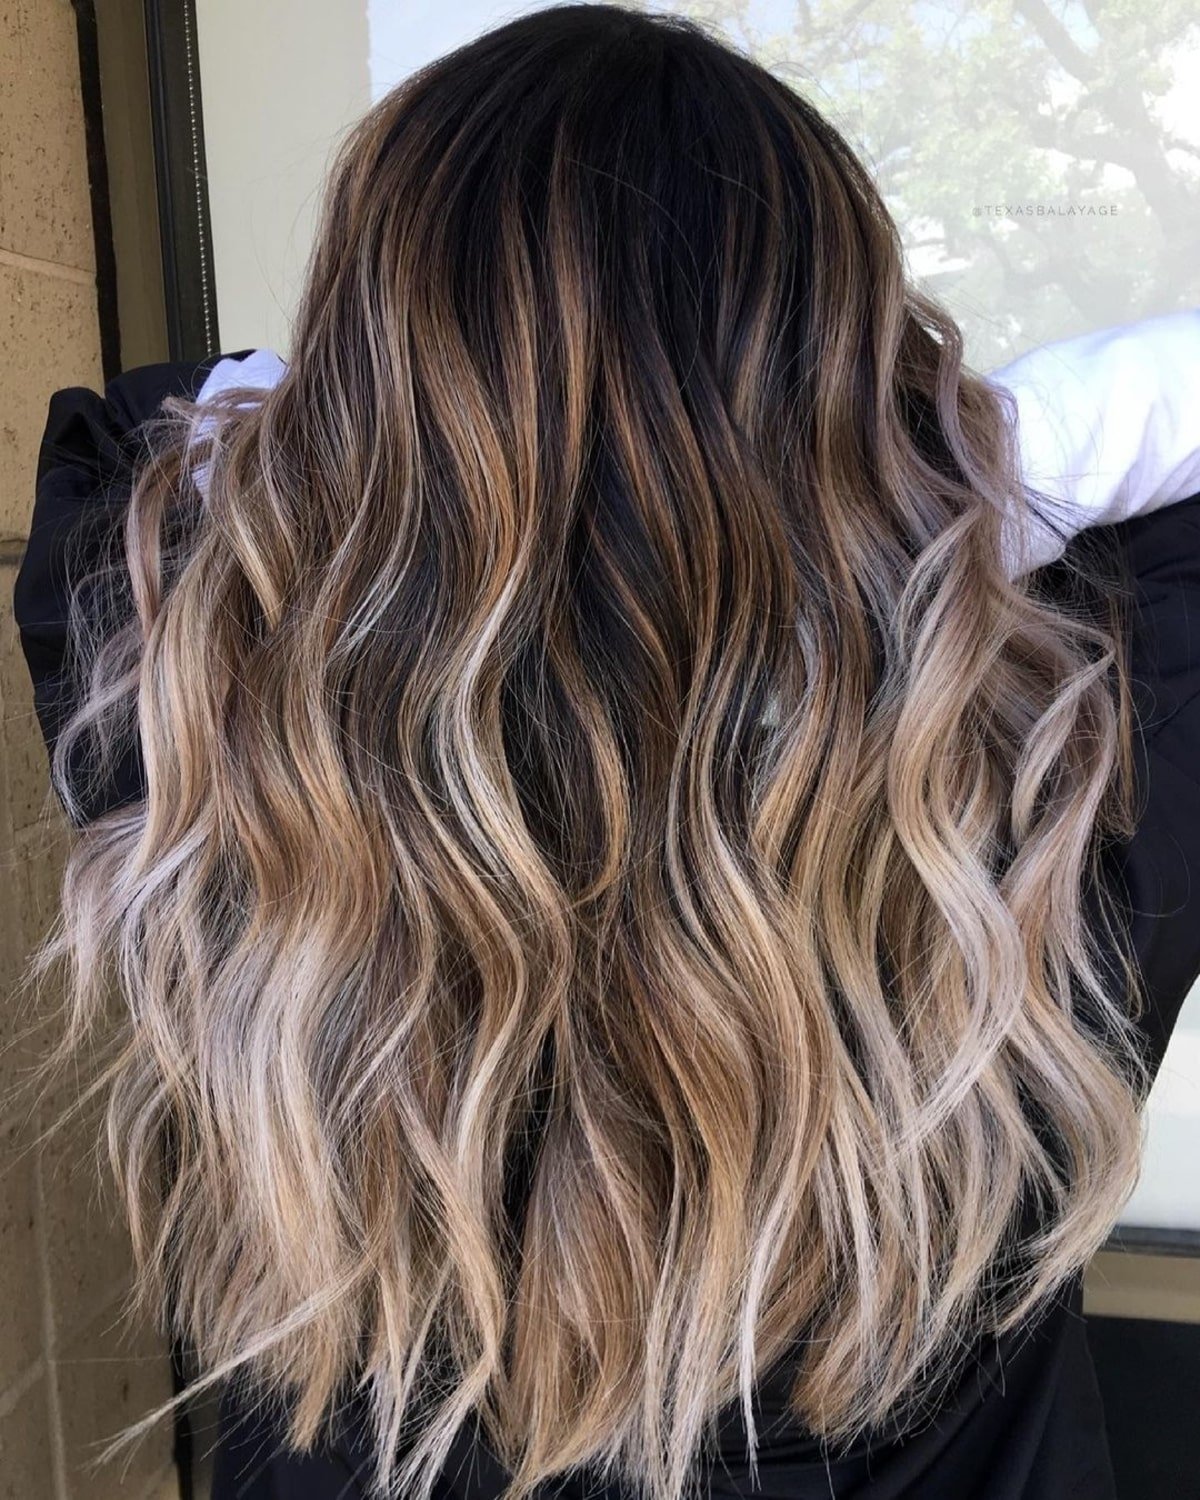 Gorgeous Black hair with blonde ombre highlights